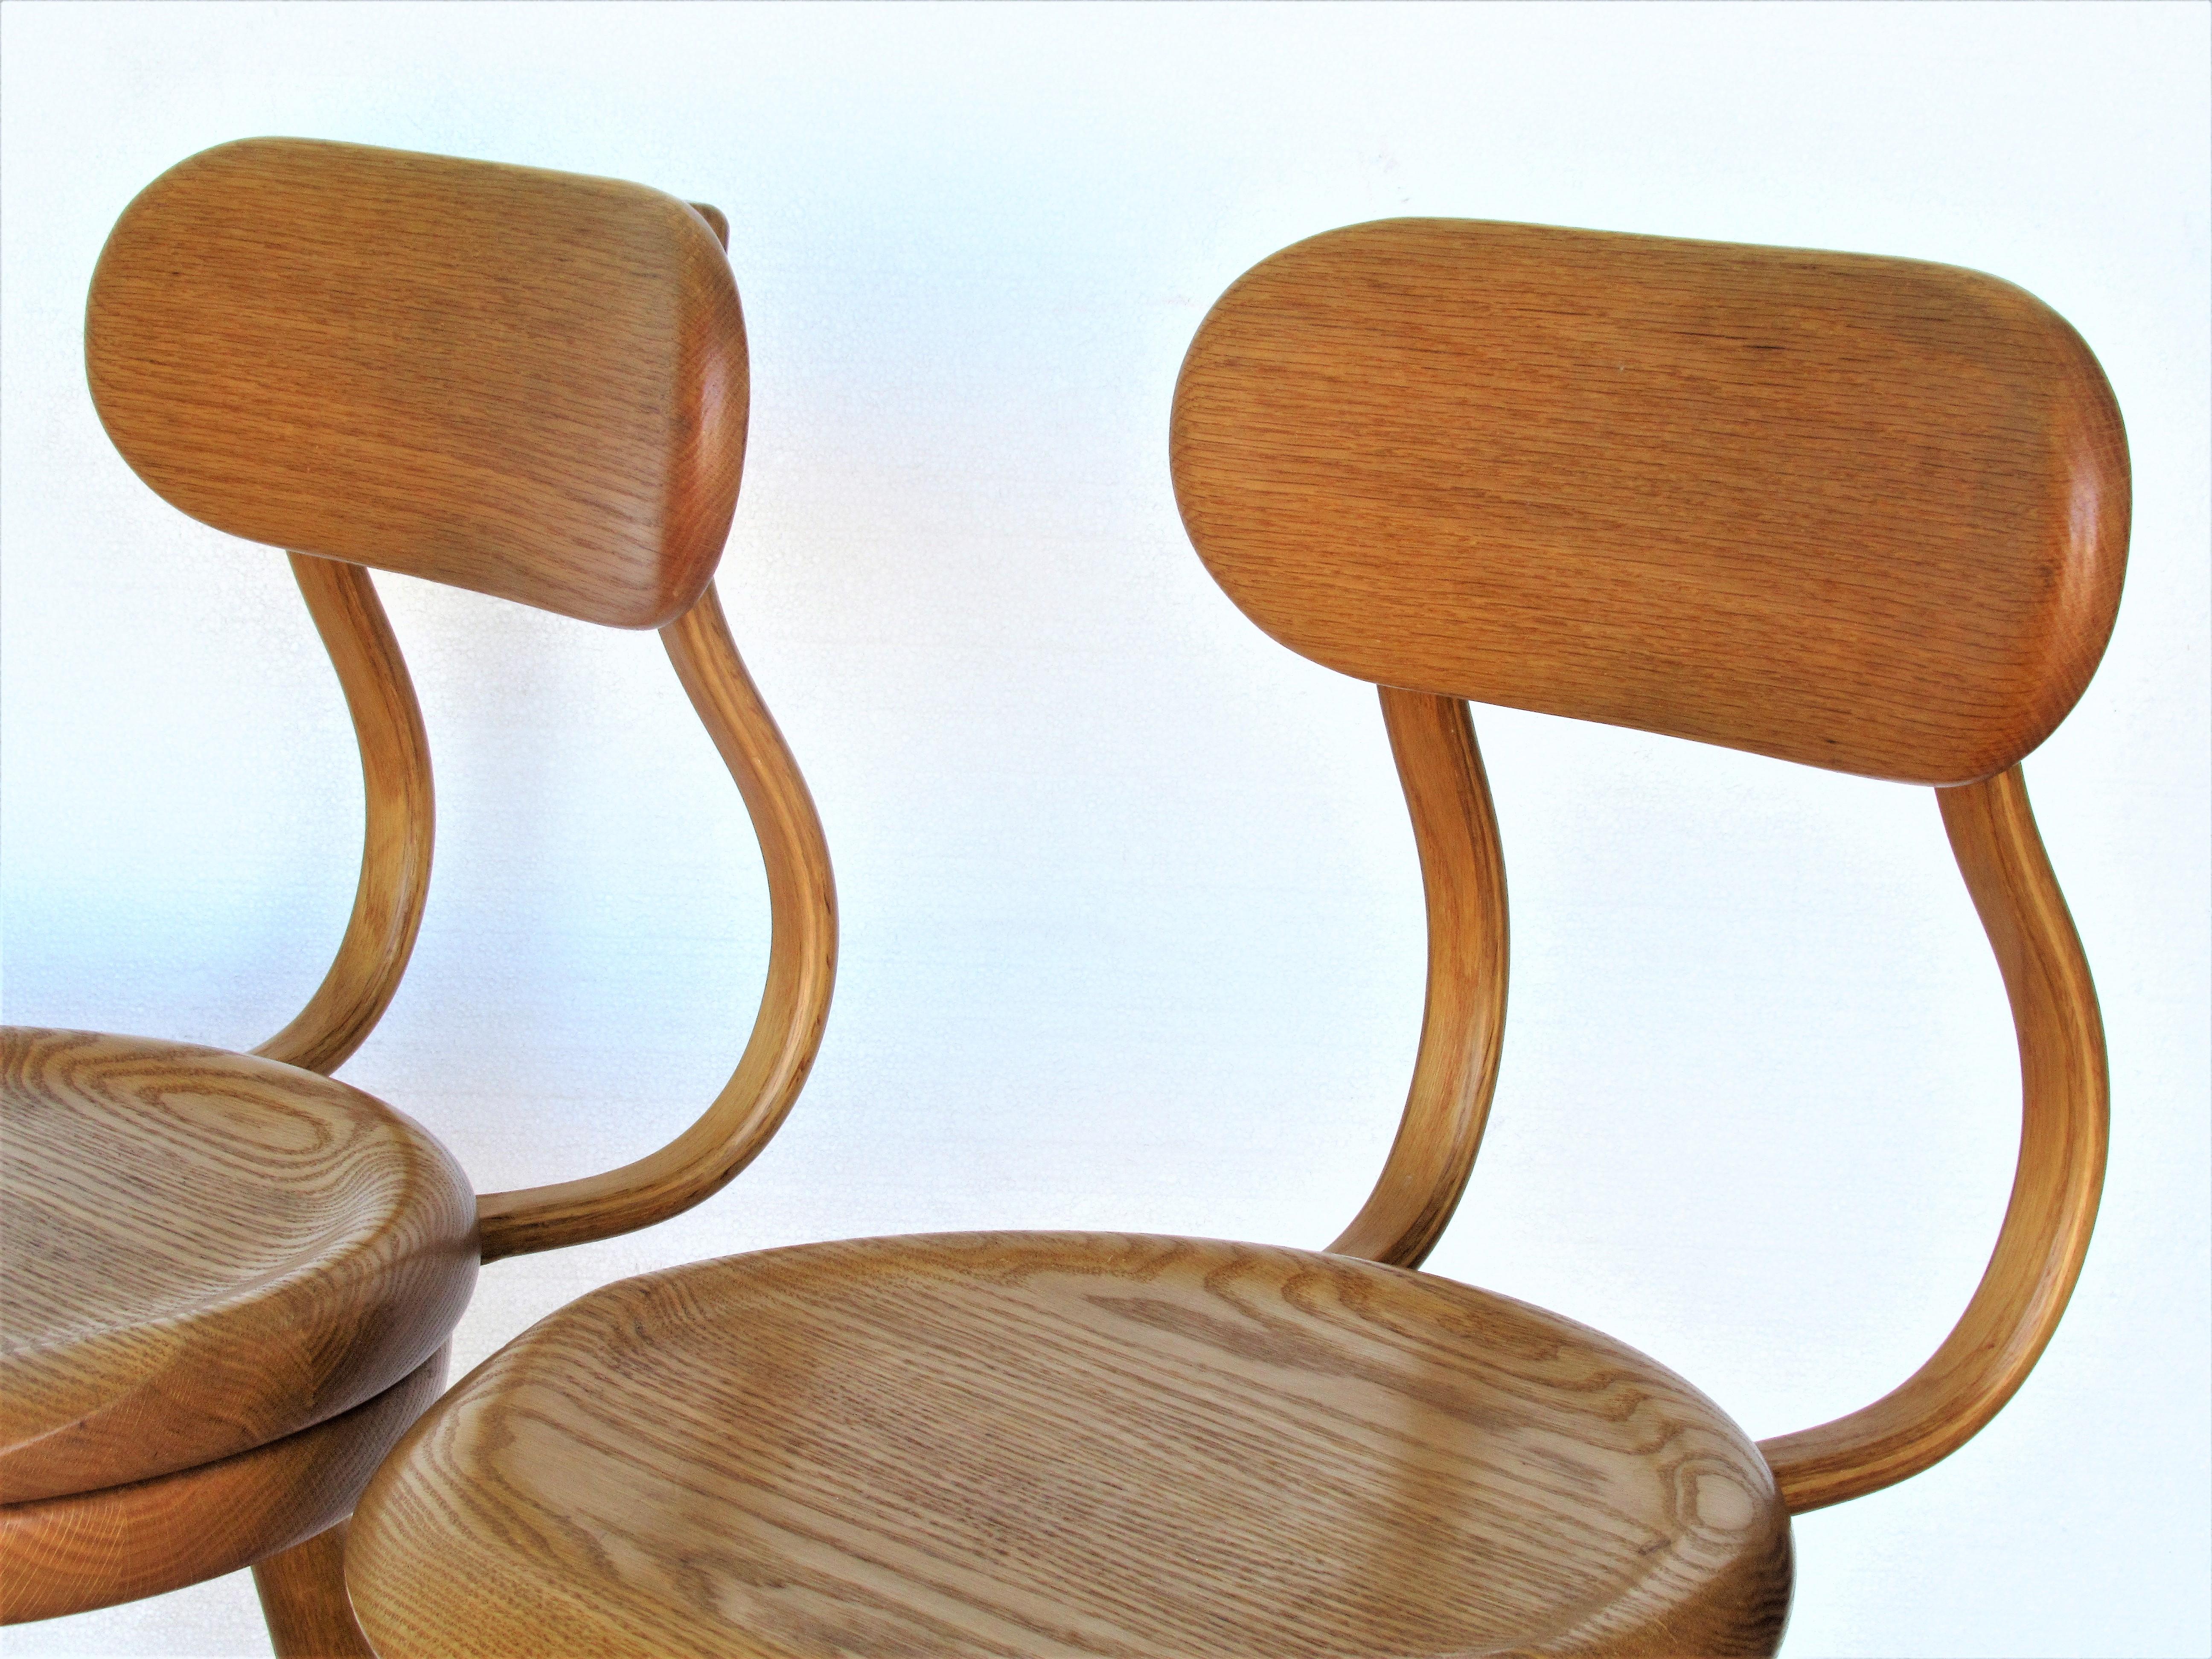 Joinery Swivel Seat Stools by Kai Pedersen Woodworking Studio, USA, 1980 For Sale